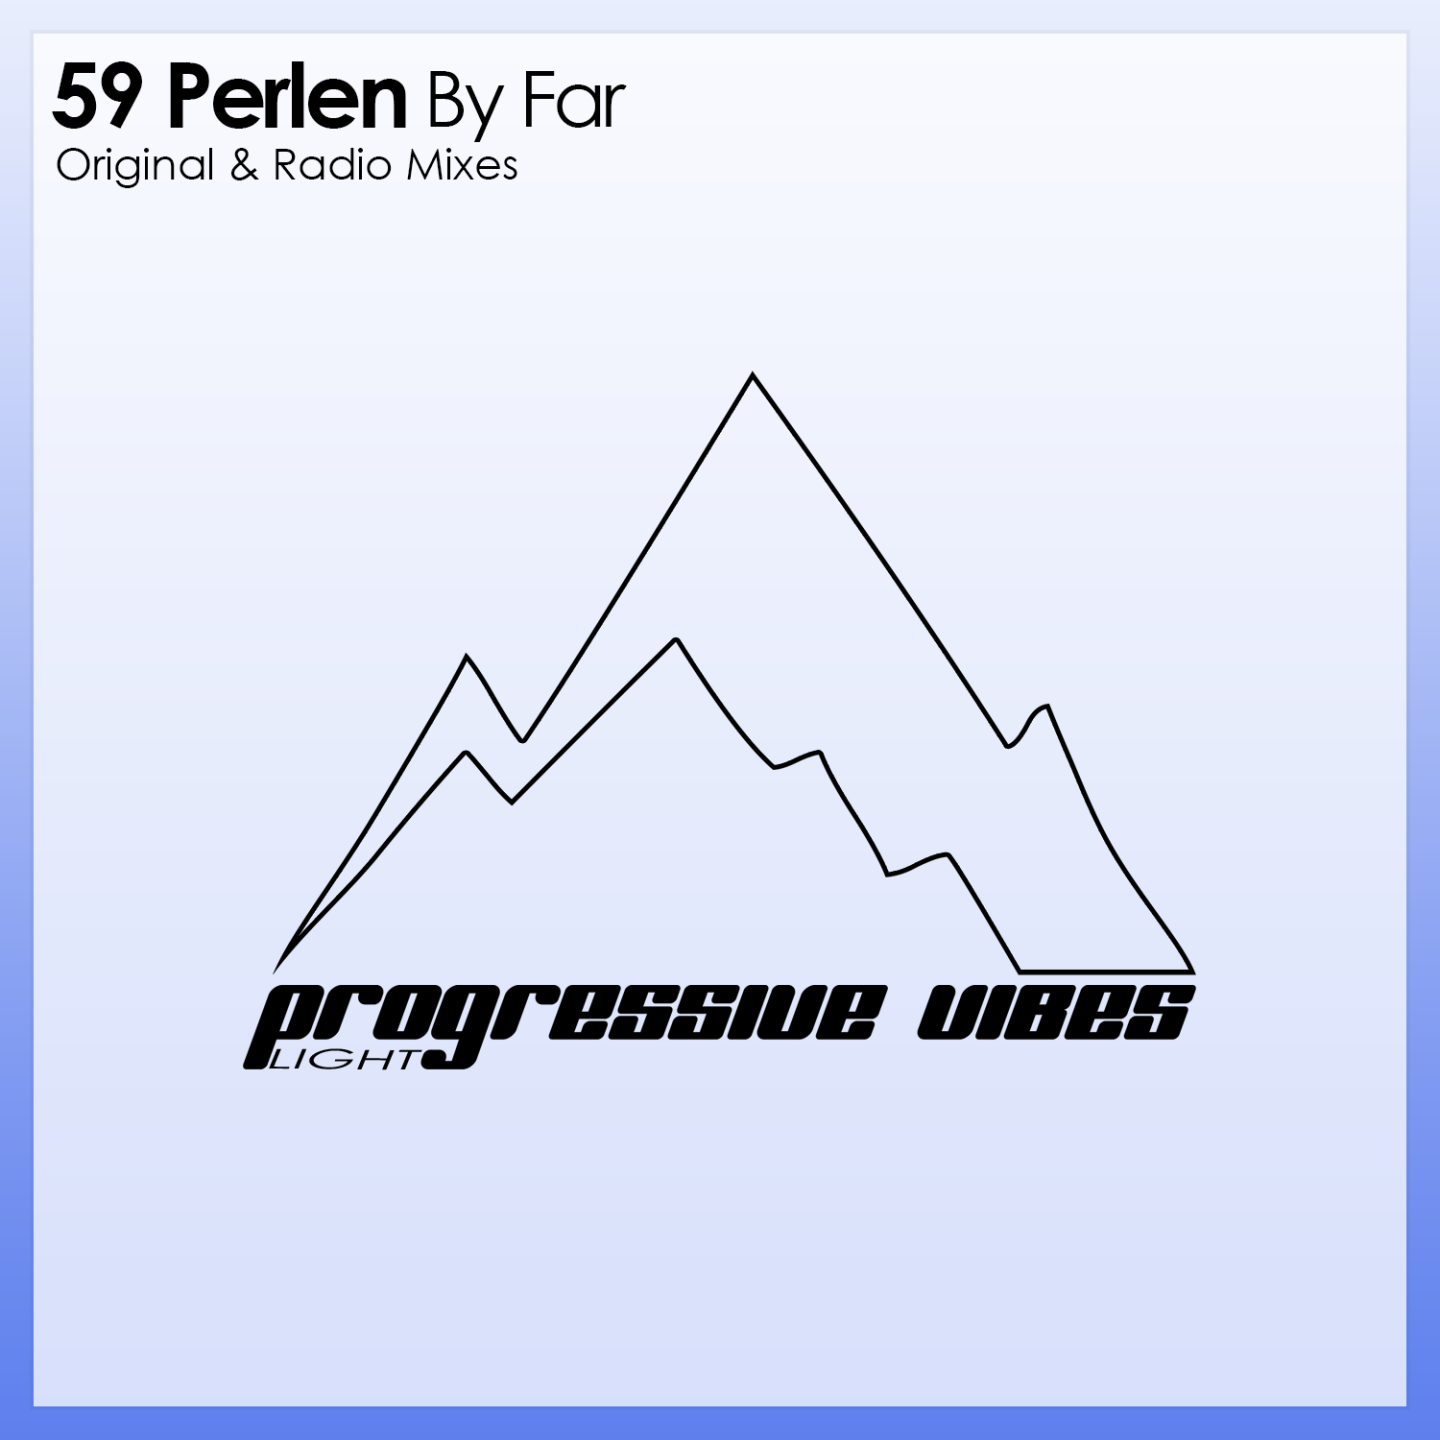 The artwork for the single By Far by 59 Perlen